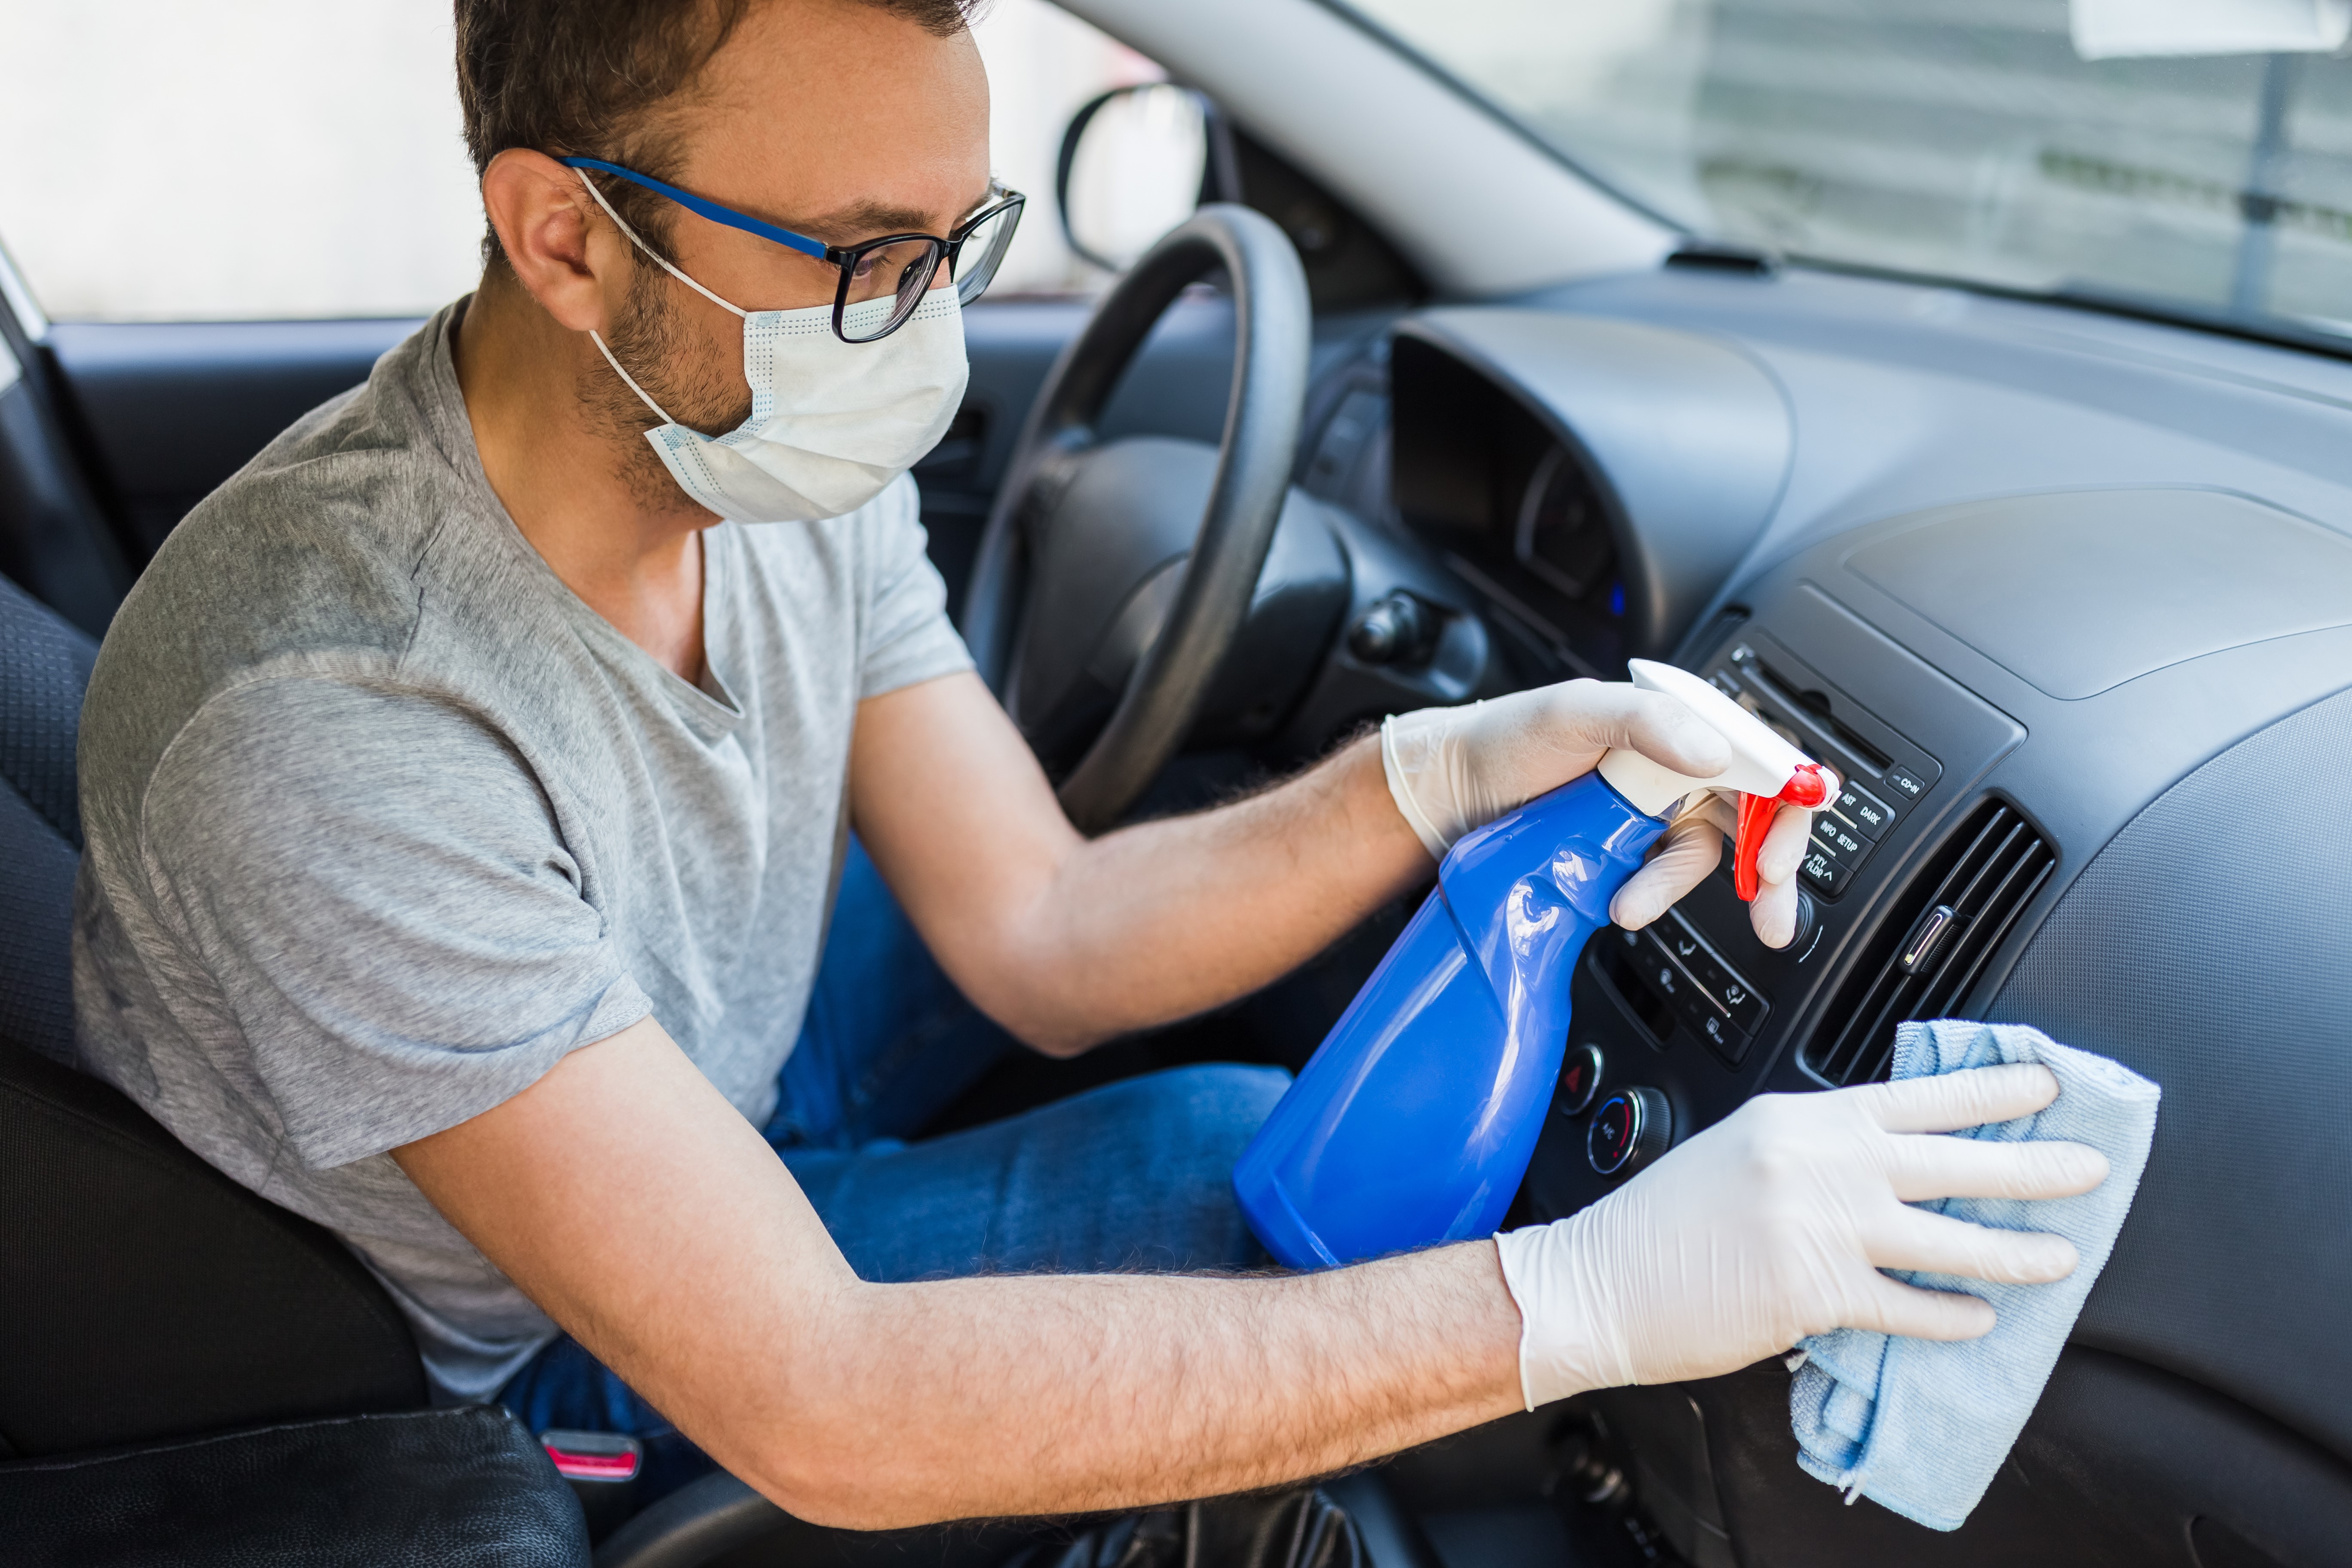 Man Cleaning the Interior of a Car with a Mask on